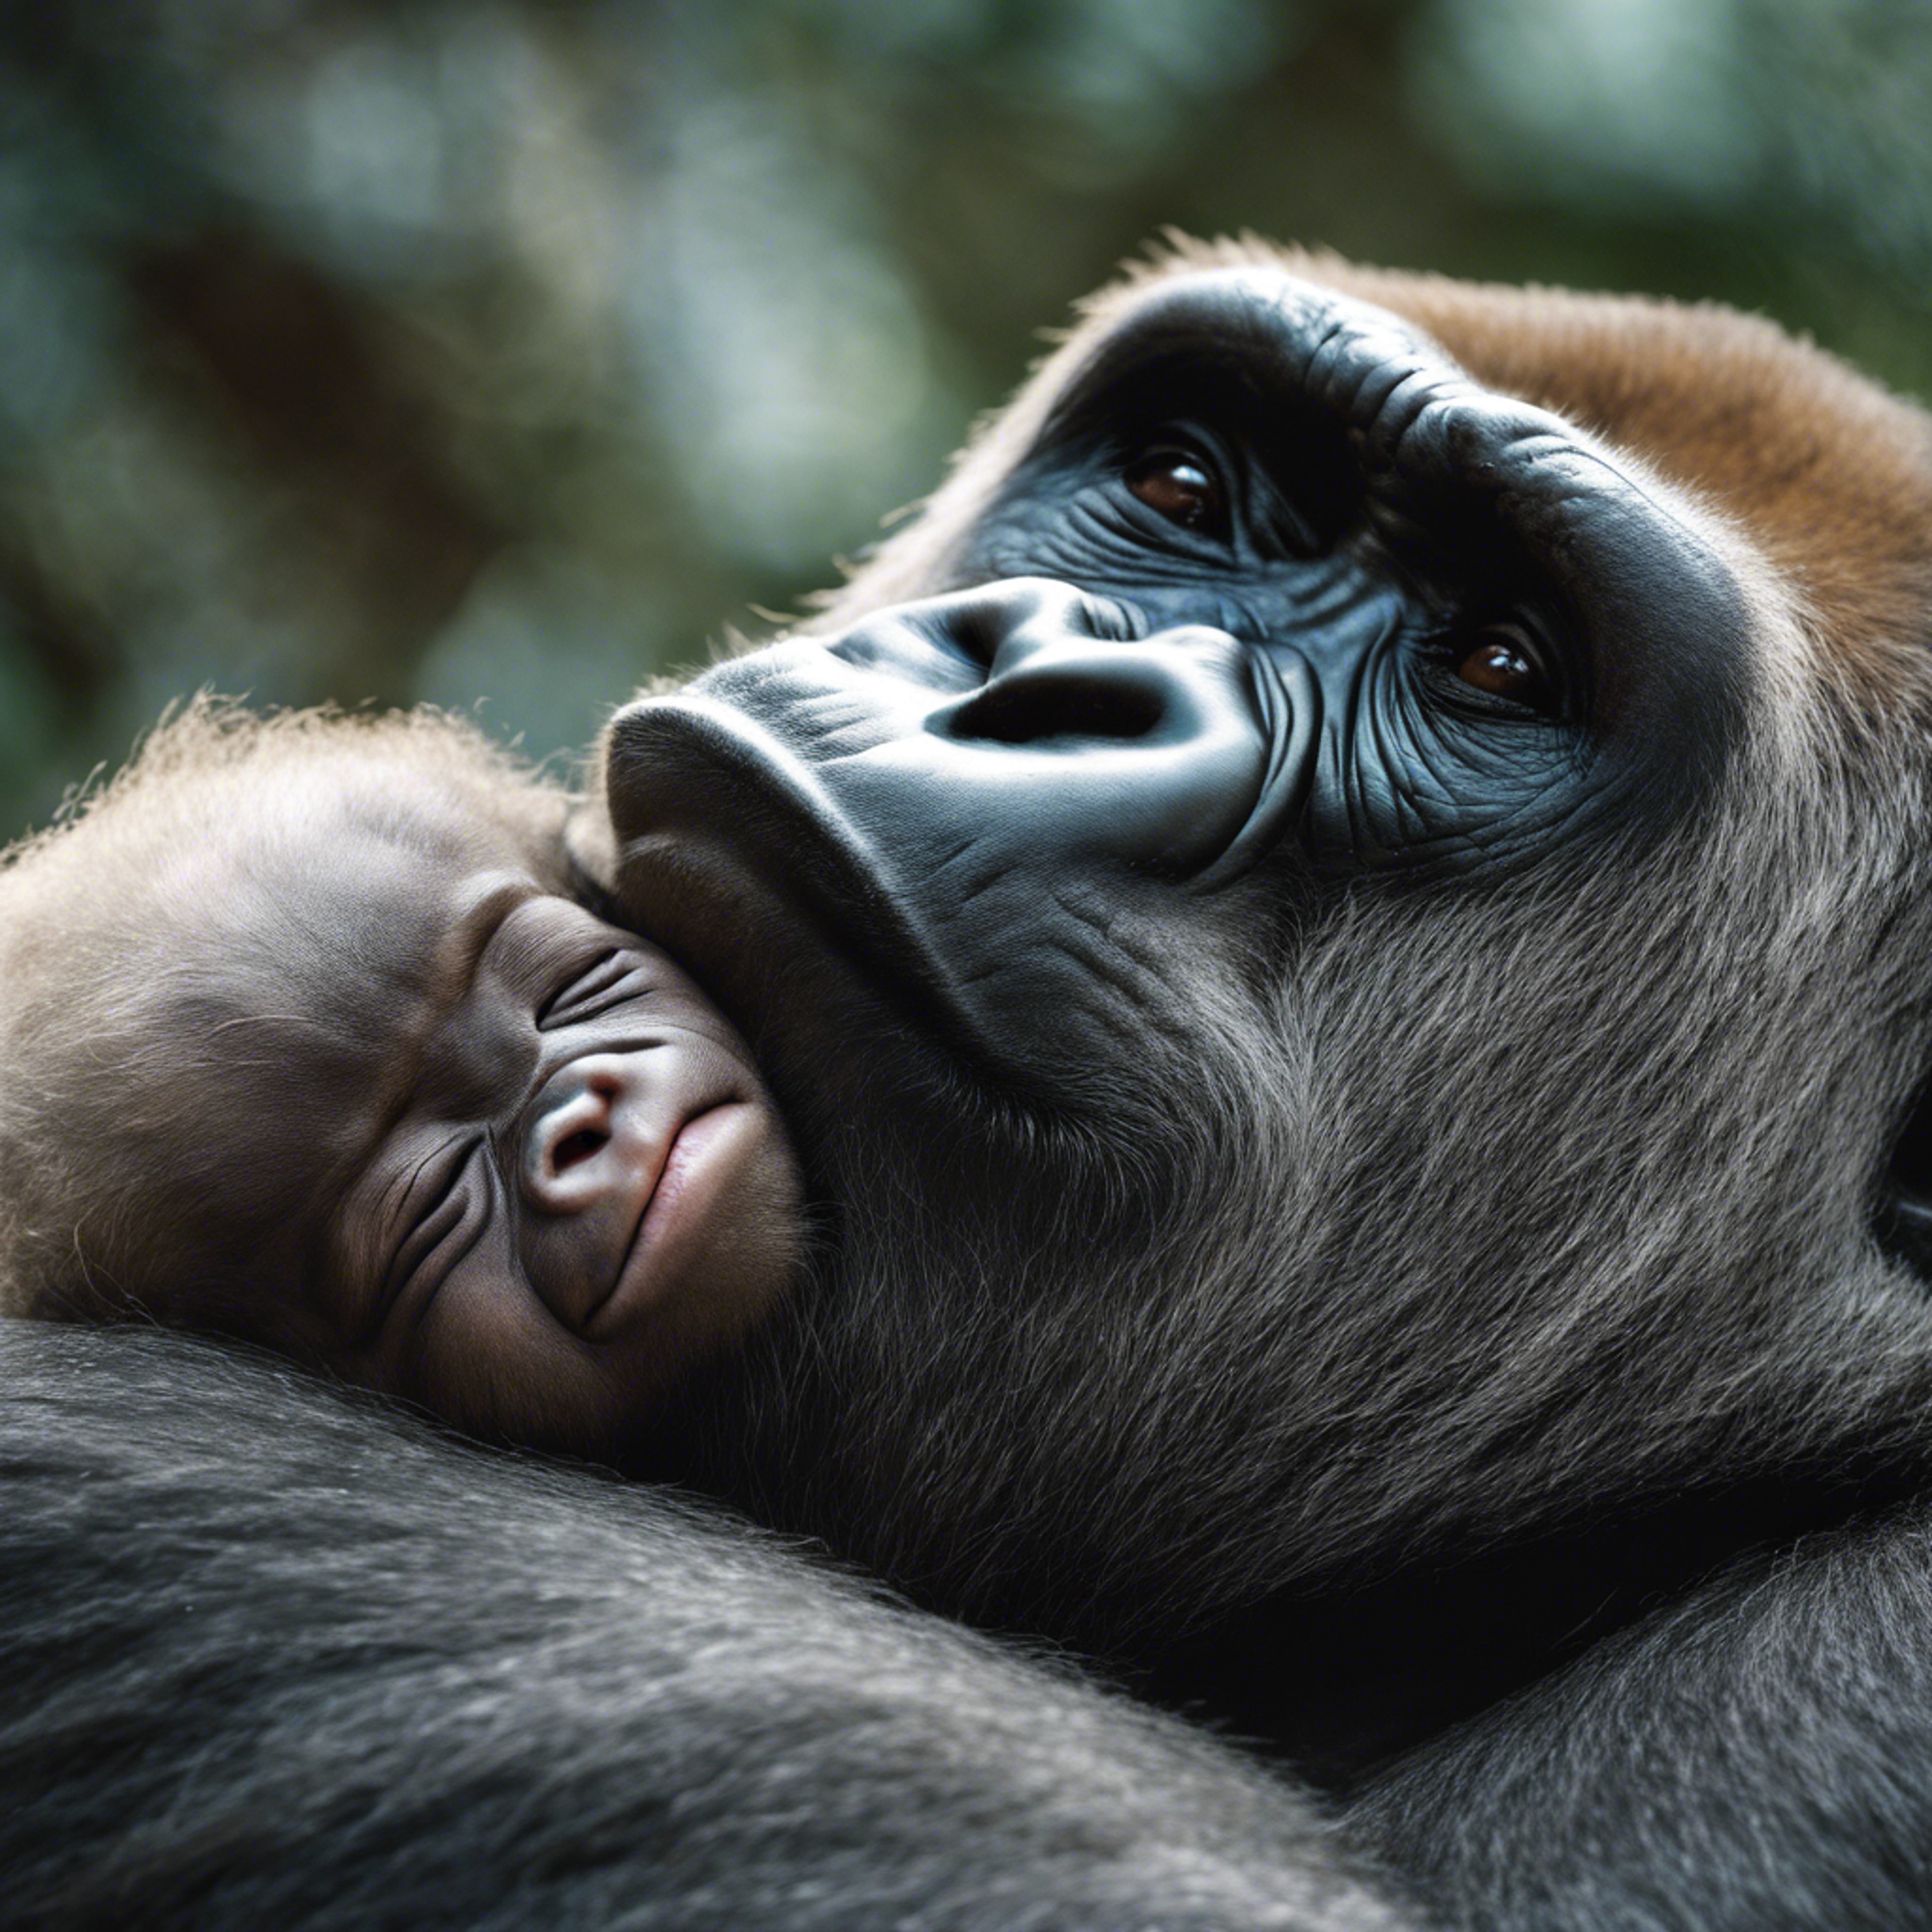 A close-up, emotional study of a gorilla mother's face as she cradles her sleeping newborn. 墙纸[516e0f2ed6254482ad03]